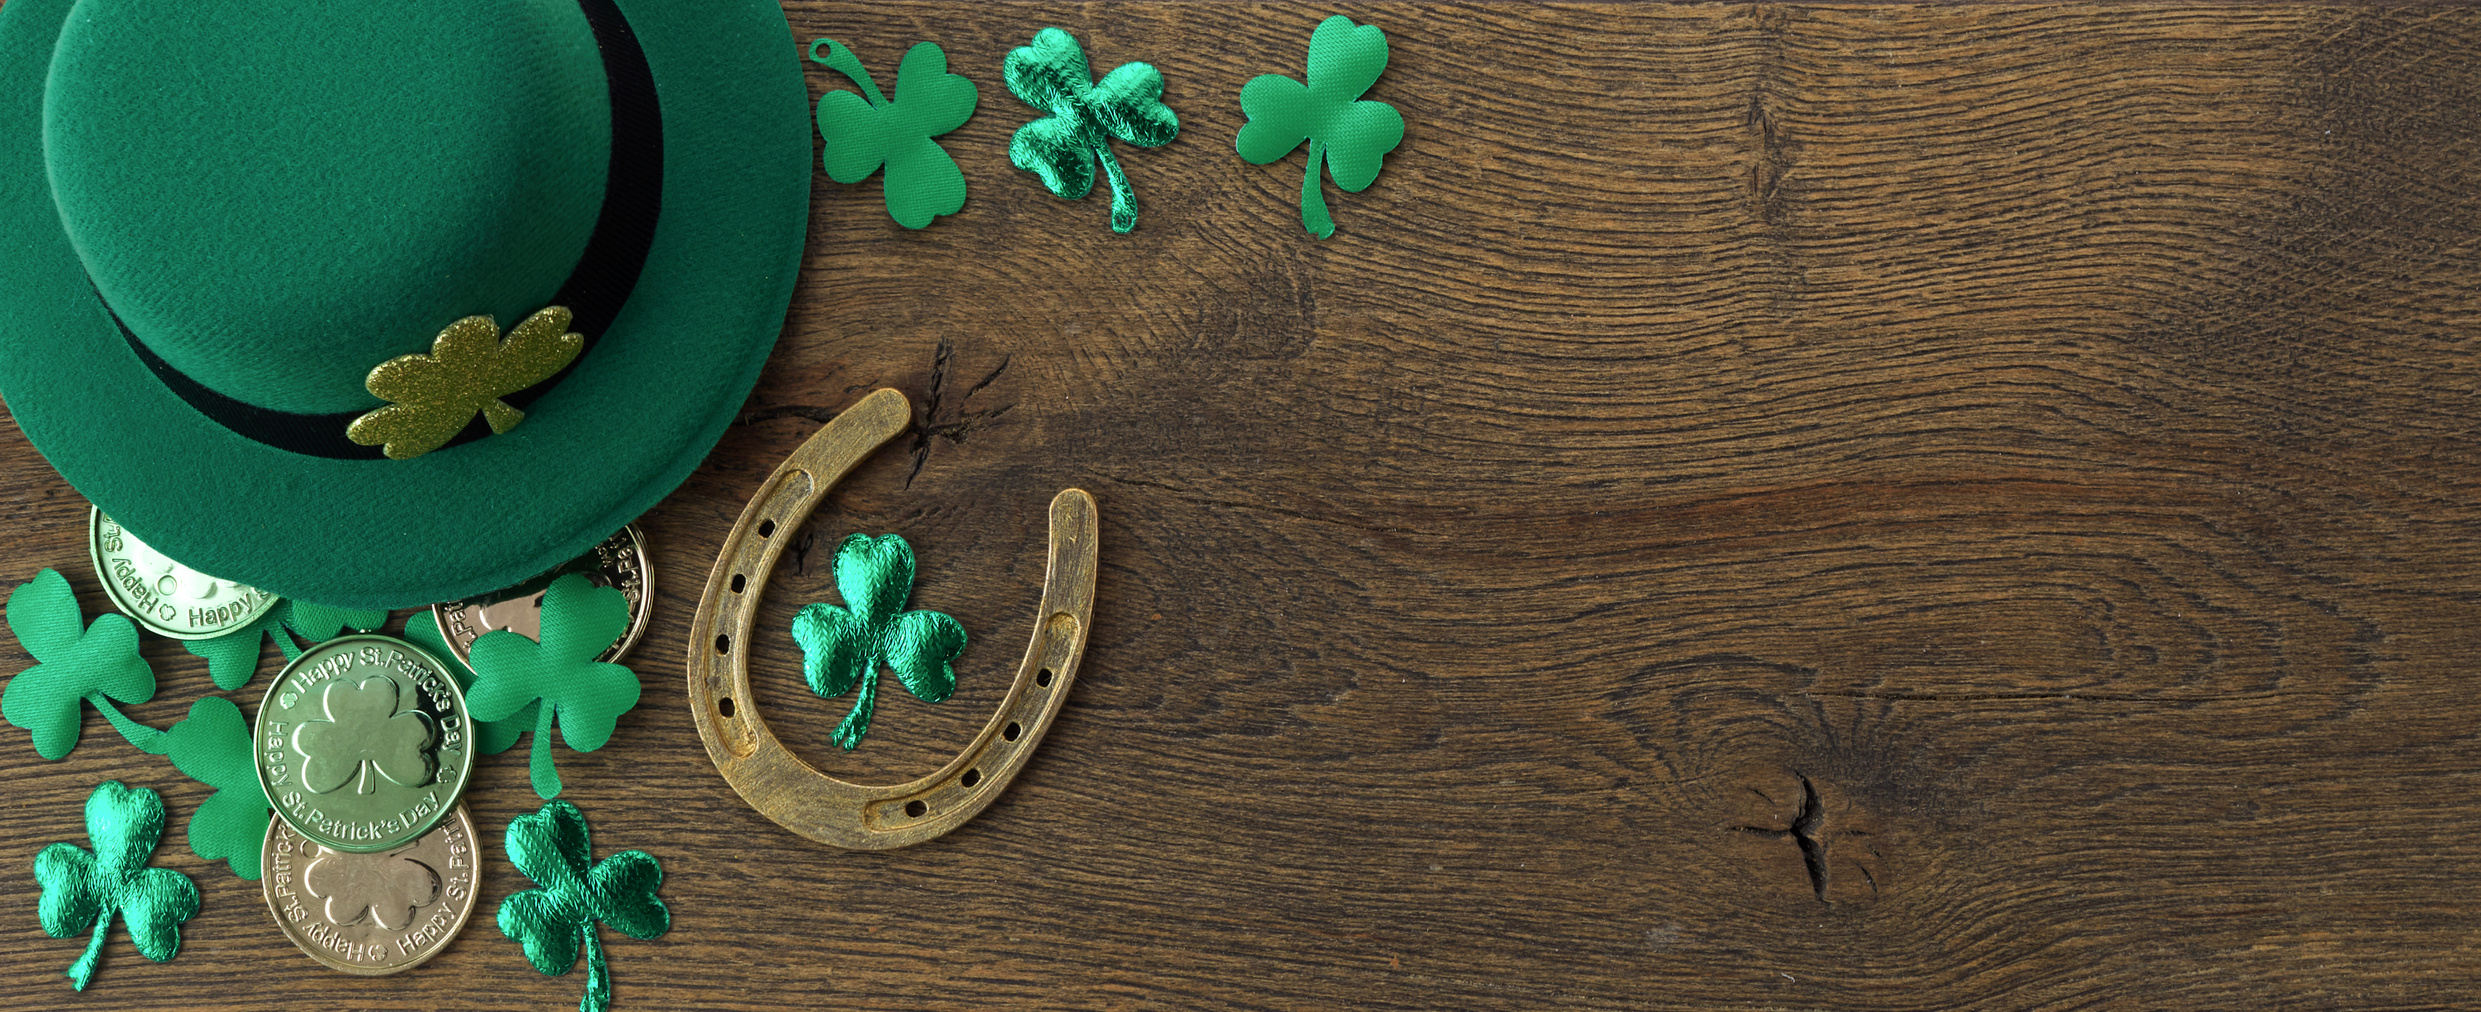 Saint Patrick's Day Decorations on Wooden Background